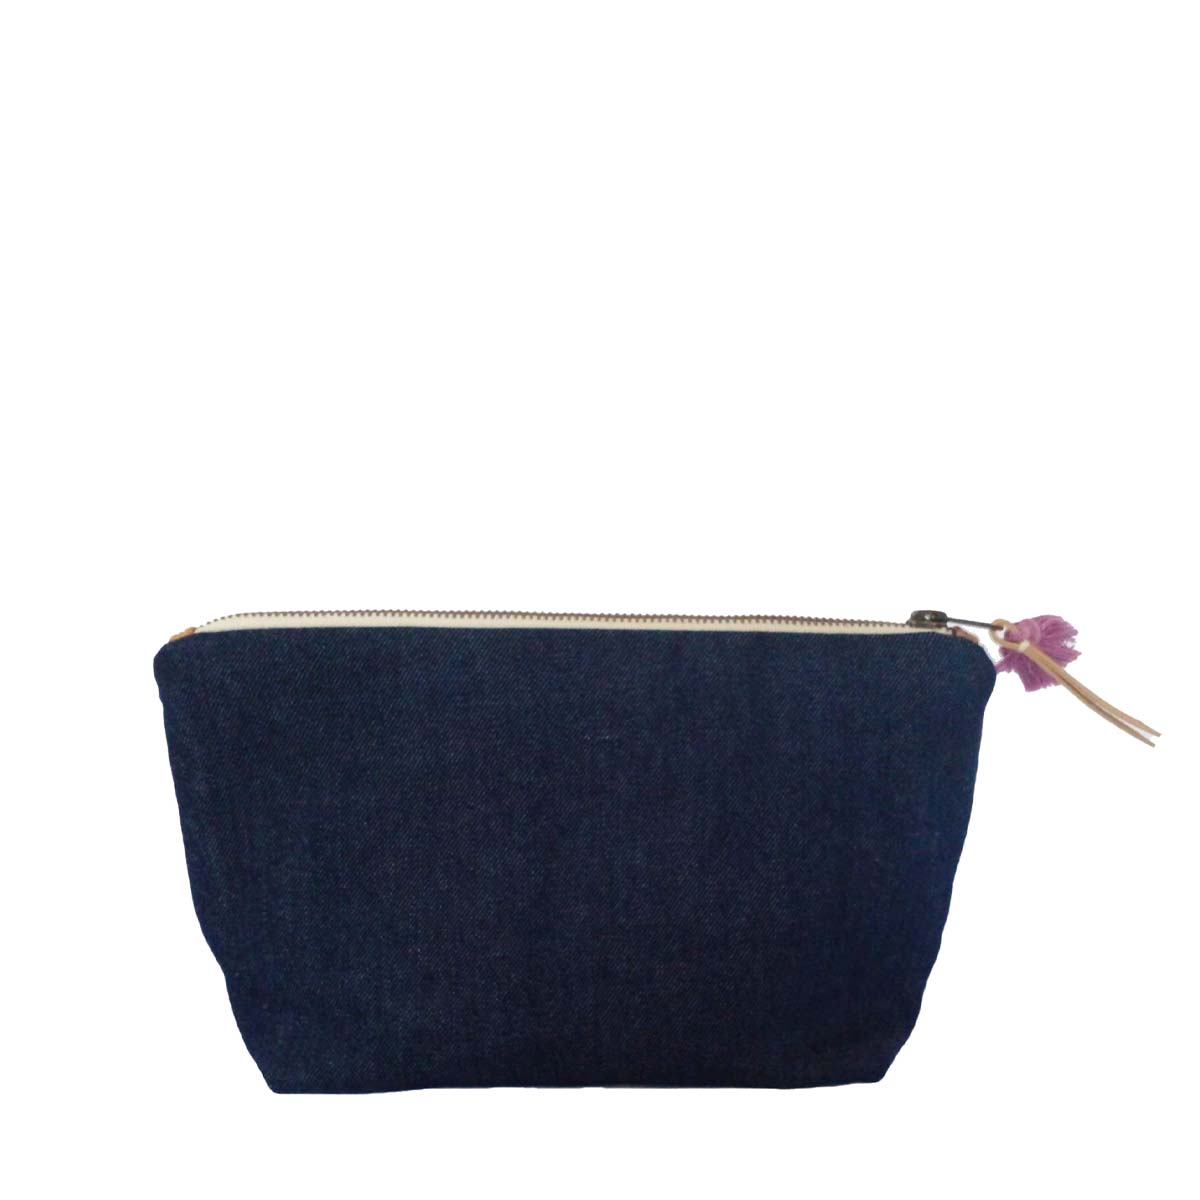 The back of the hand woven artisan Cristina Cosmetic Pouch in Spring Sherbert. The back side has a solid dark navy blue color. It has a magenta mini tassel and a leather zipper pull.